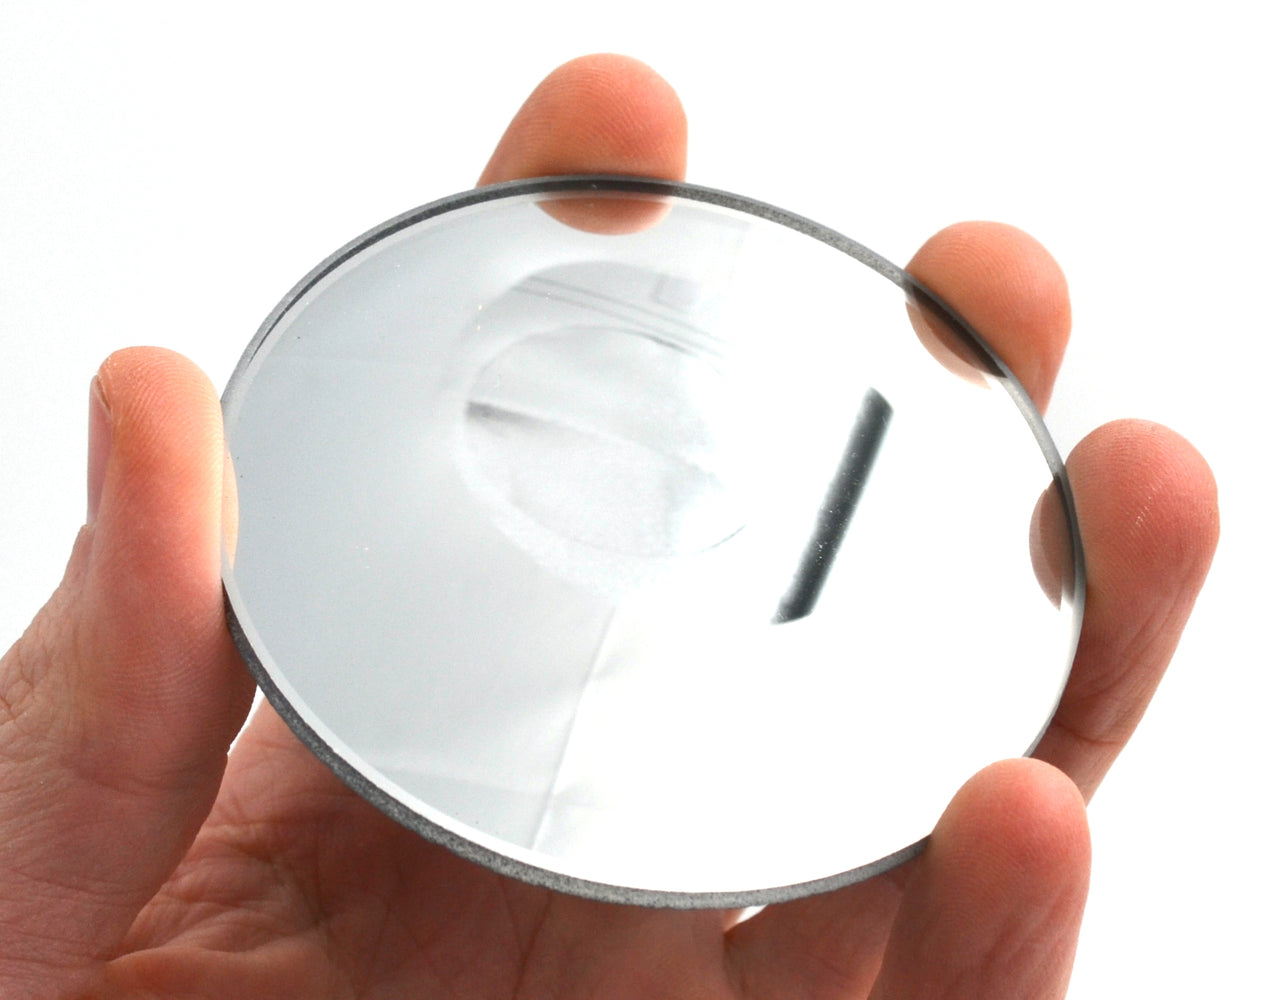 Round Convex Glass Mirror - 3" (75mm) Diameter - 100mm Focal Length - 2.8mm Thick Approx. - Eisco Labs